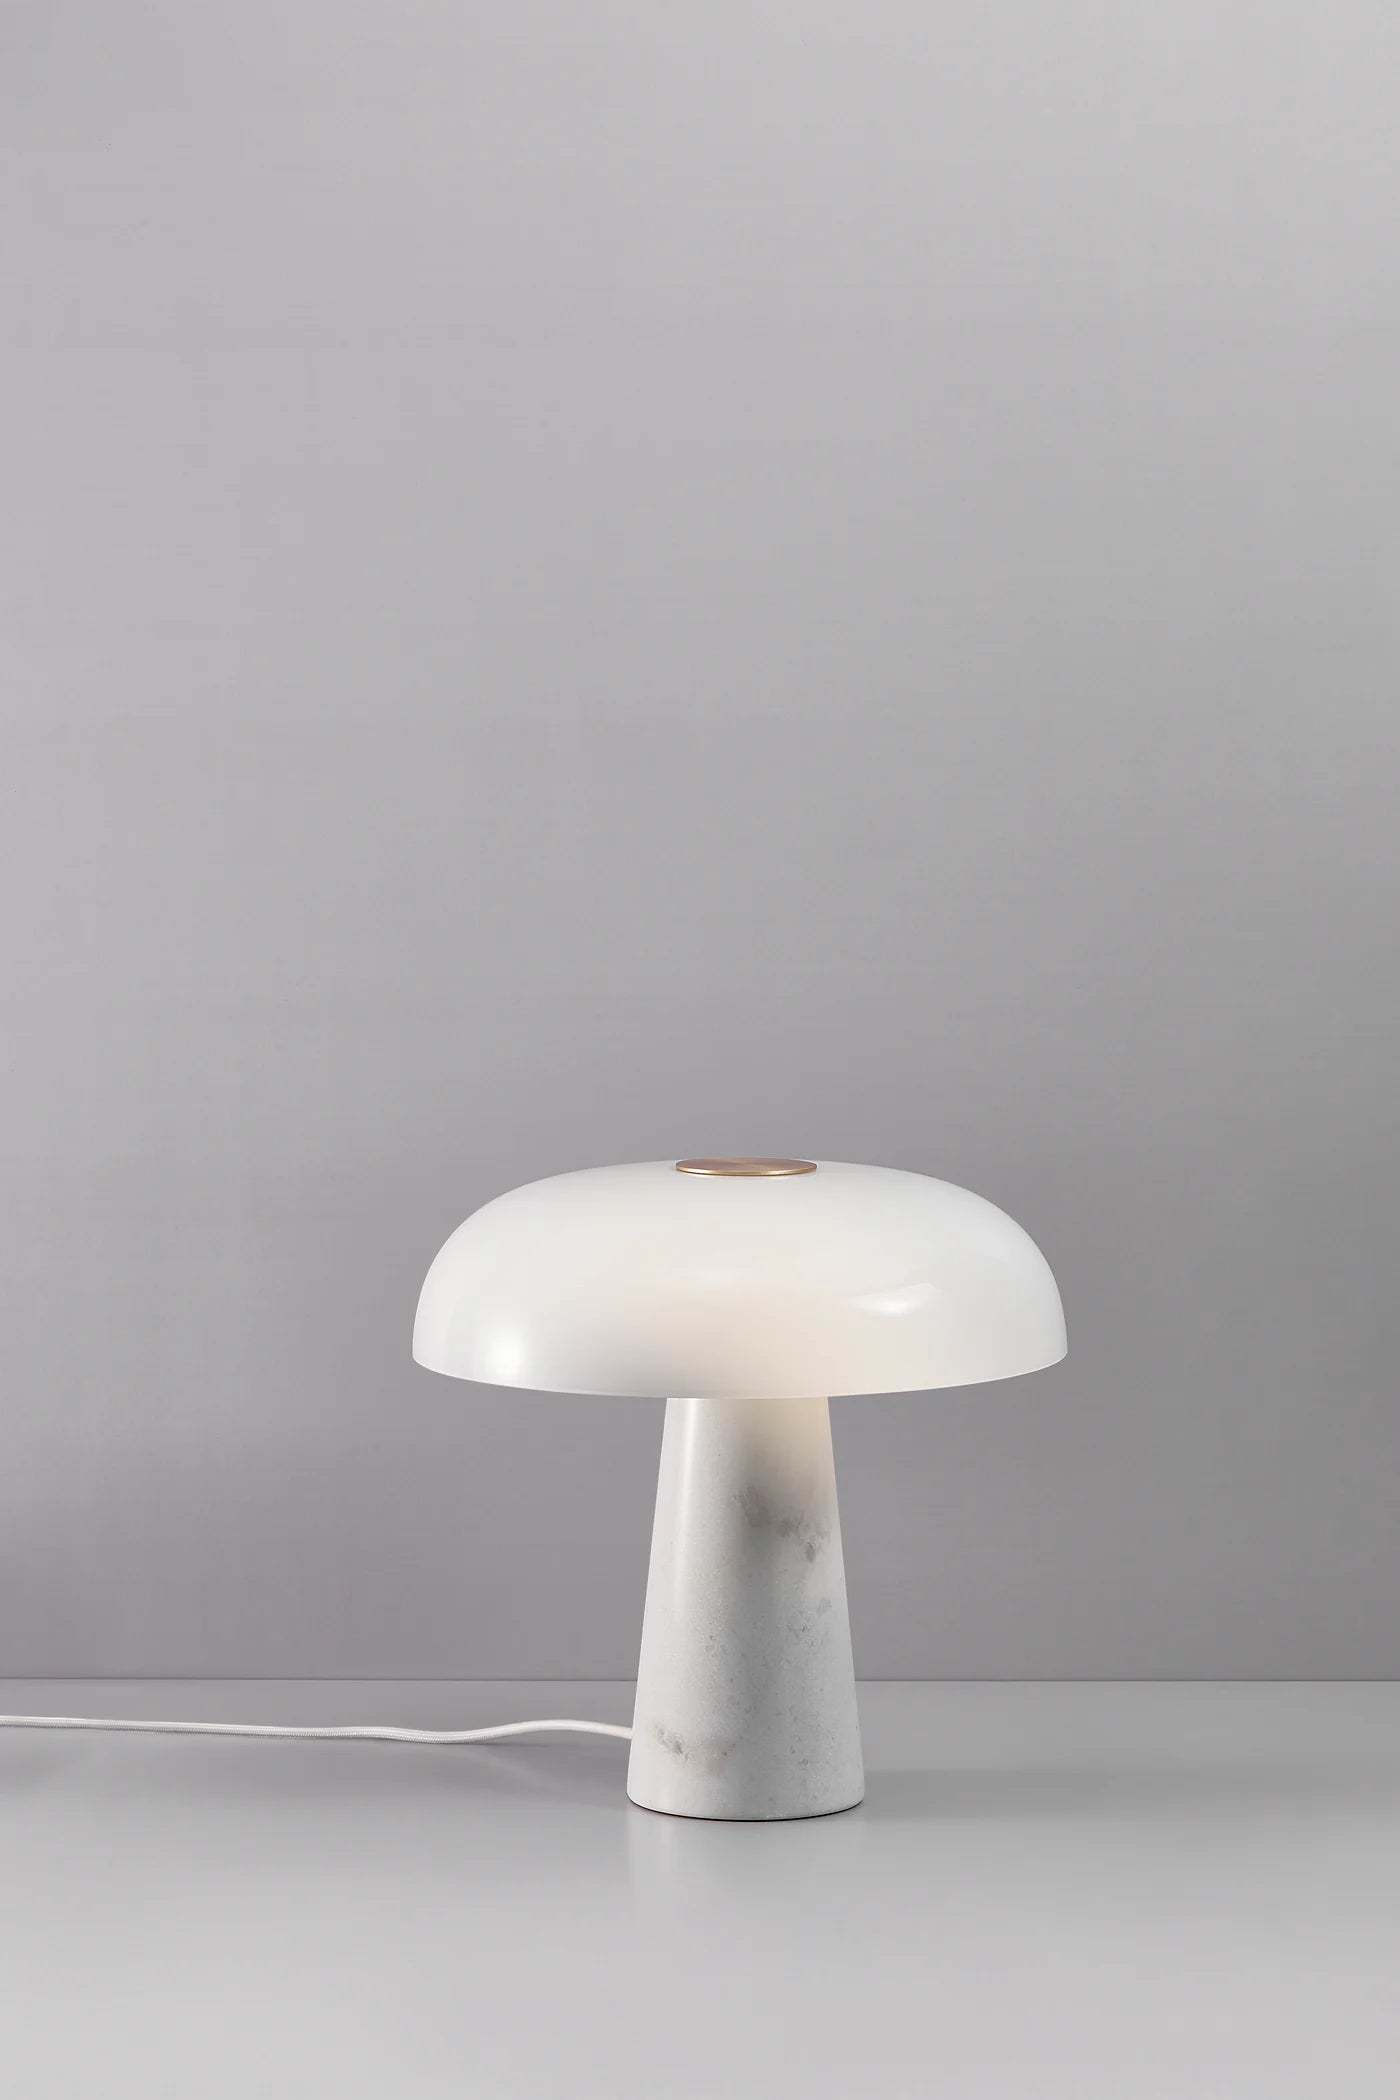 GLOSSY marble table lamp